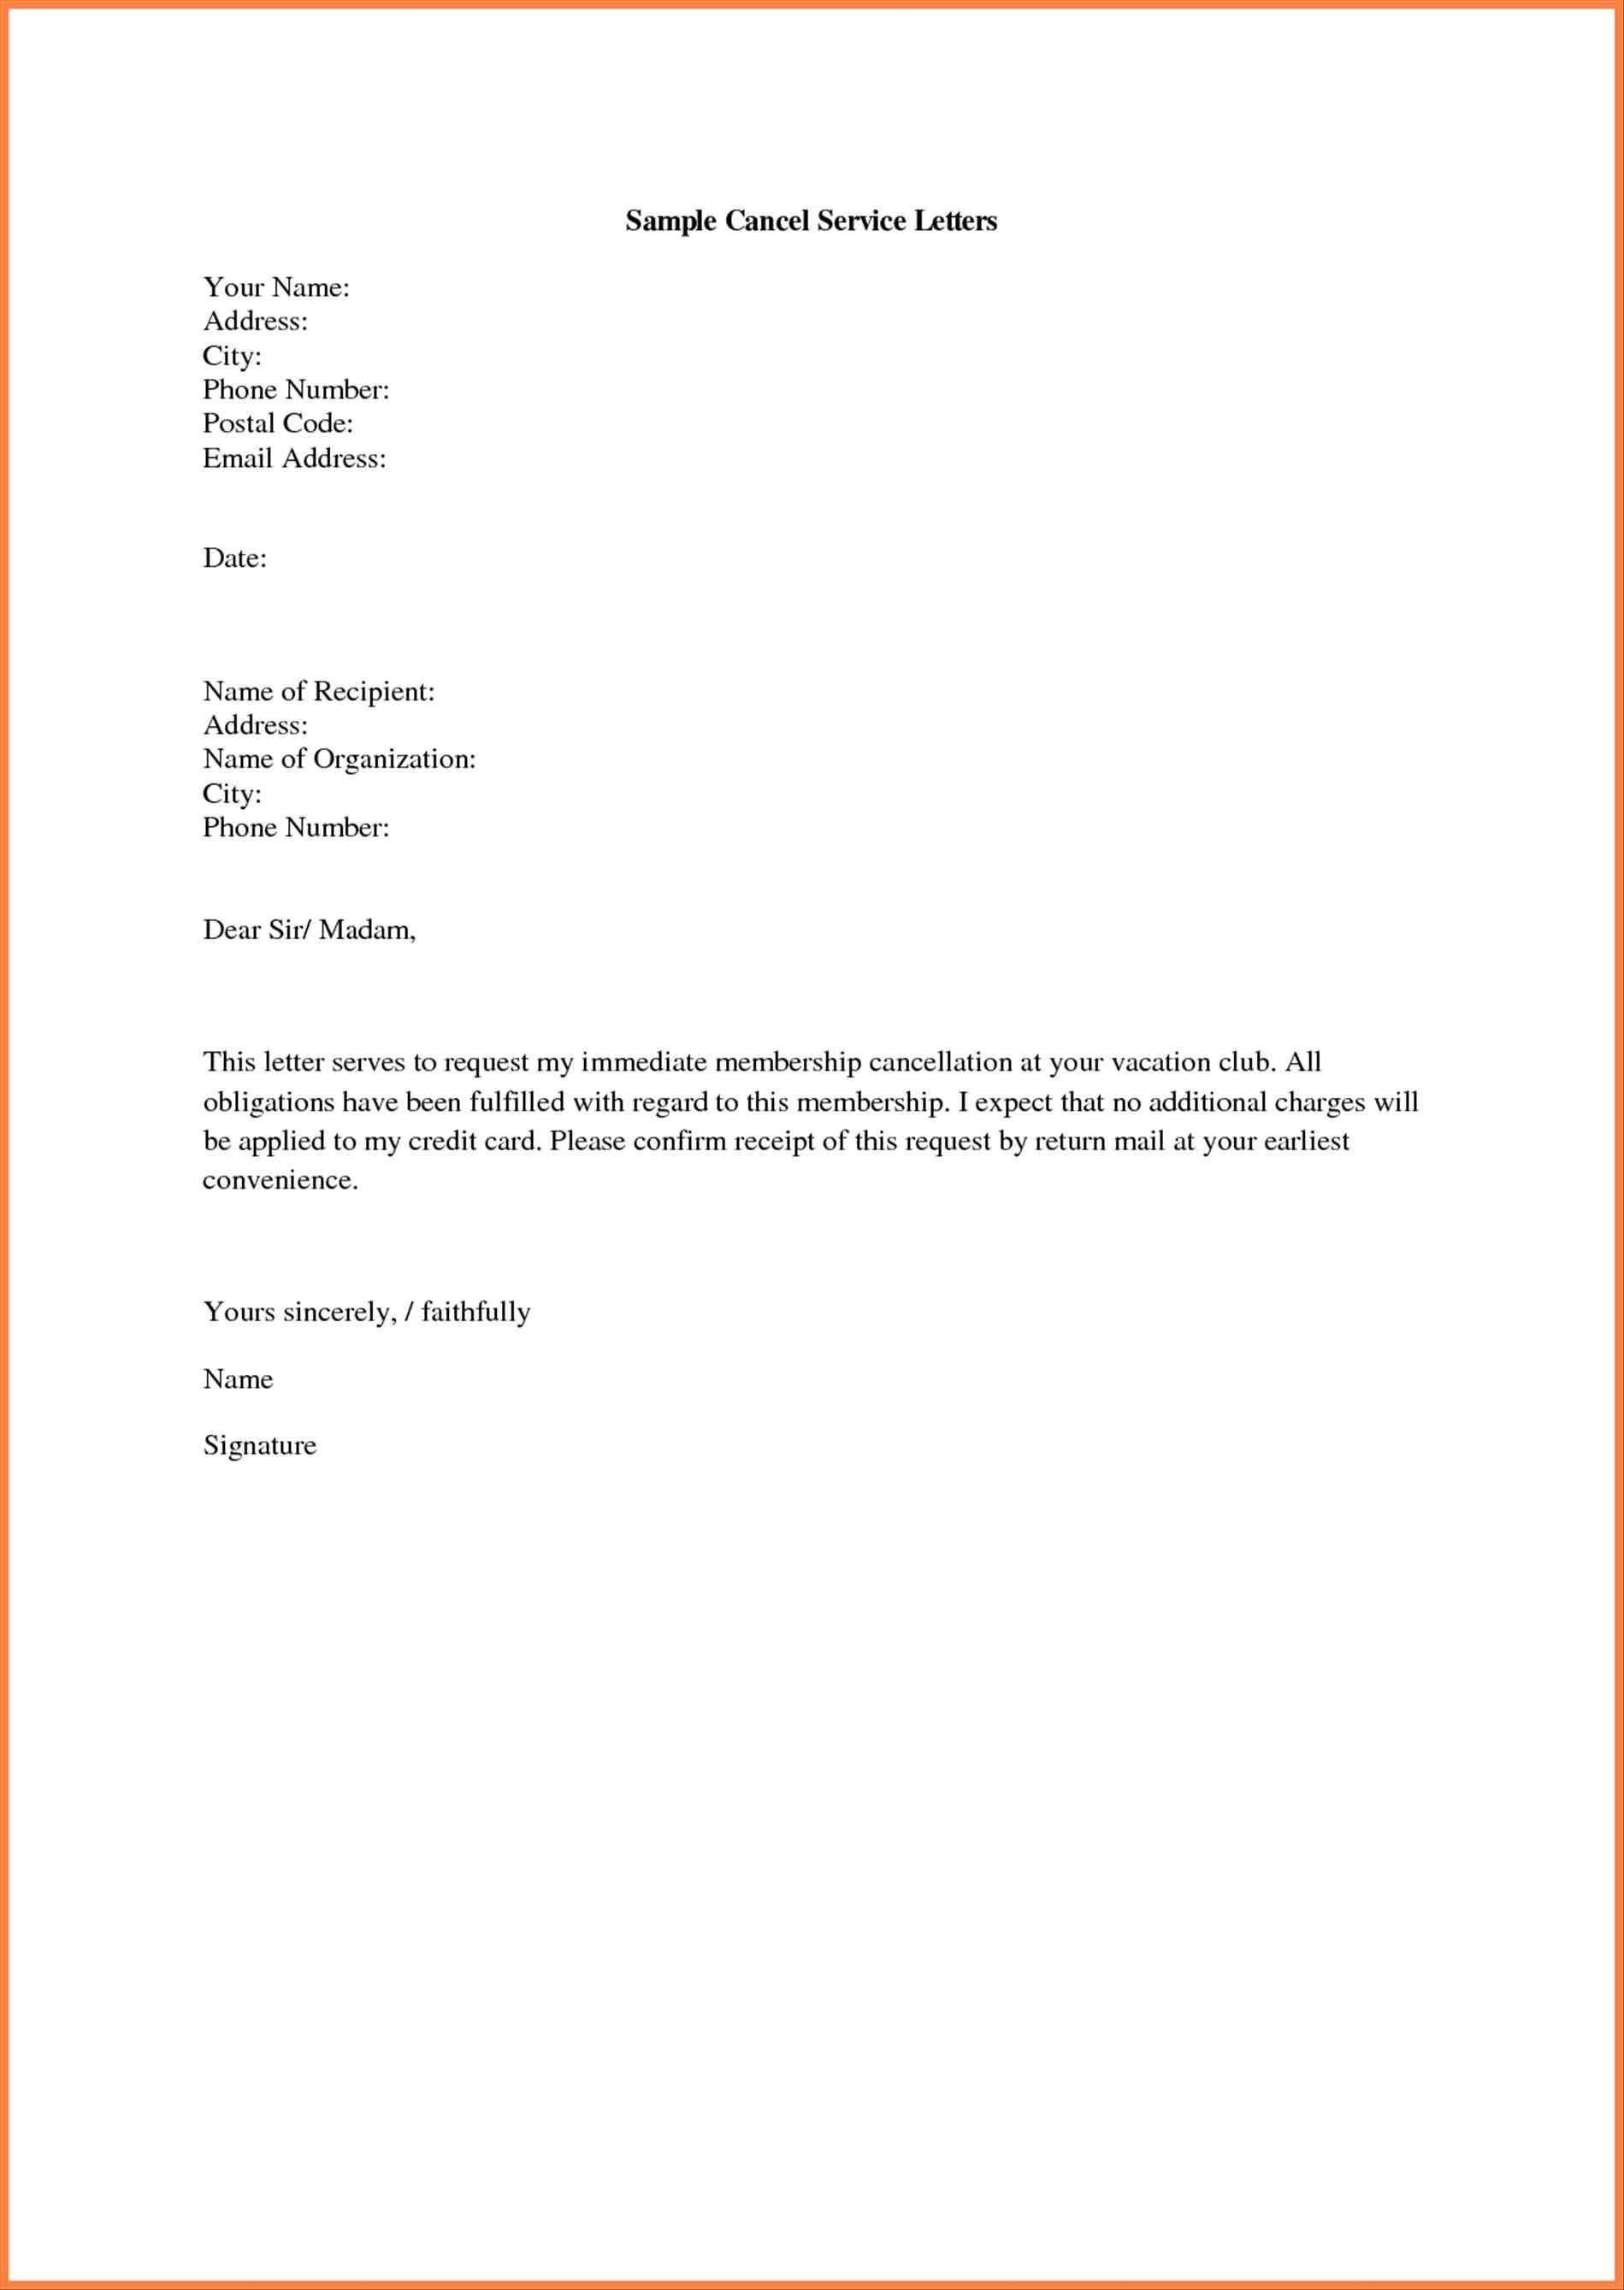 Gym Membership Cancellation Letter Template Free - Sample Cancellation Services Letter Template Best Amazing Gym